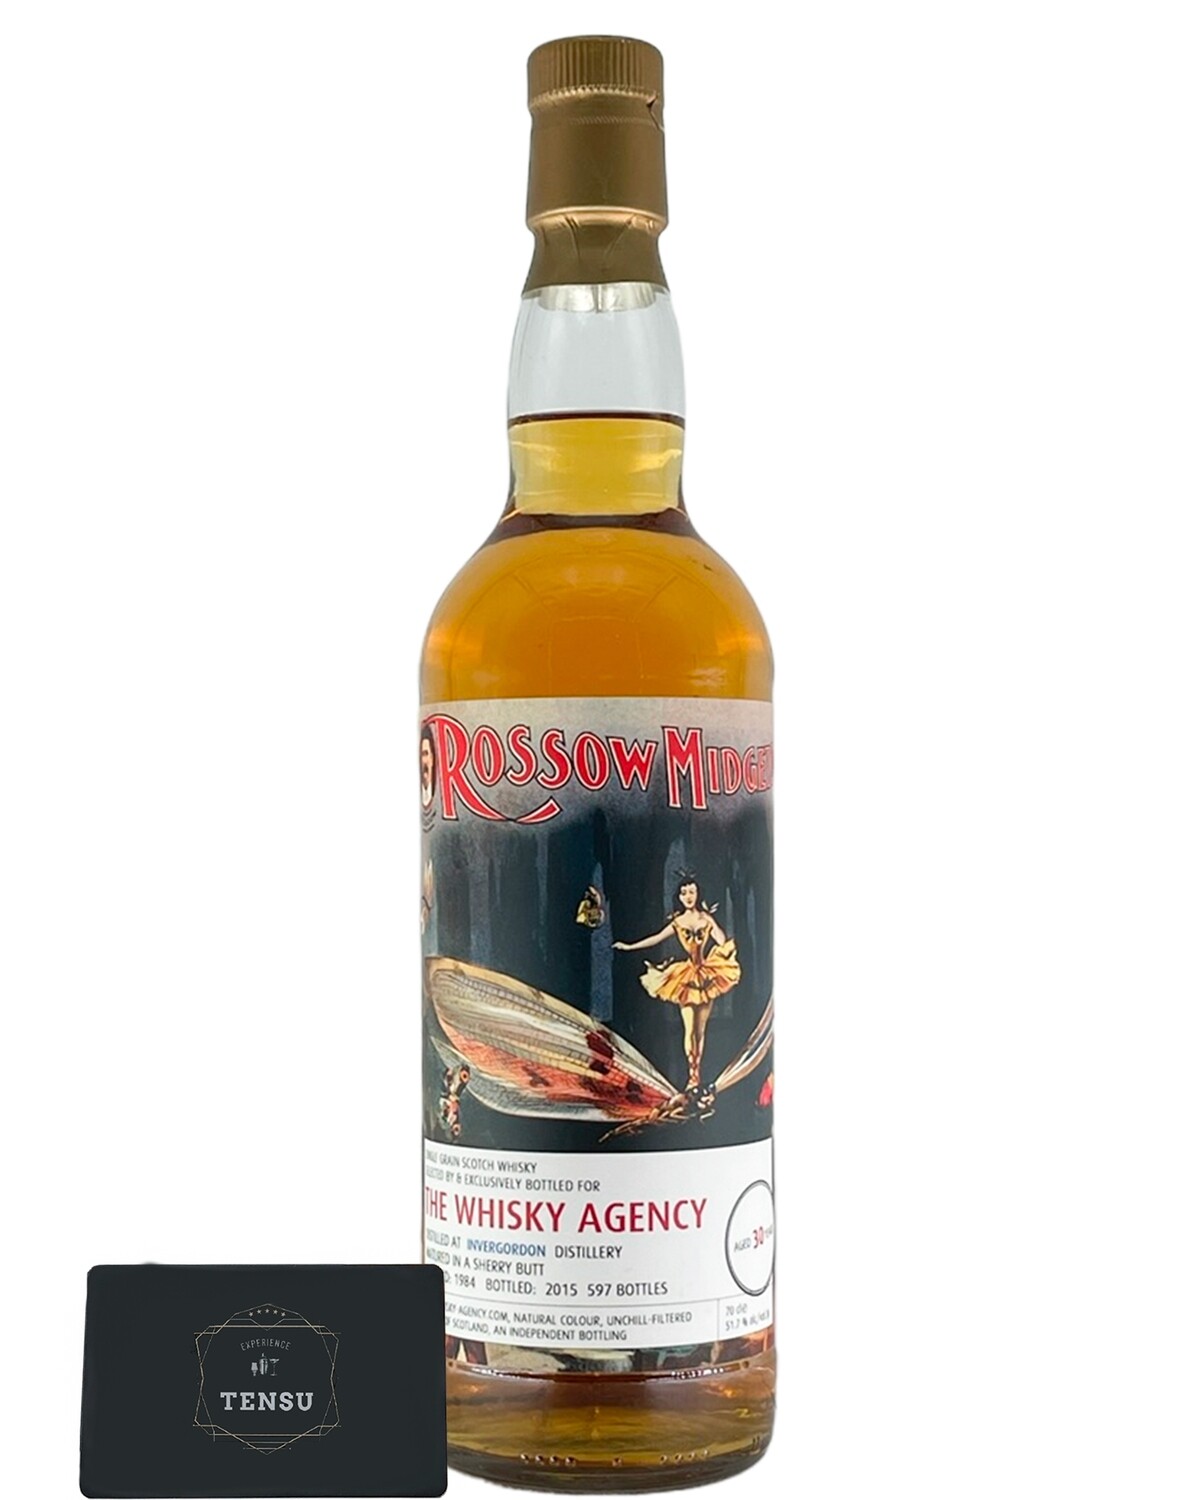 Invergordon 30 Years Old -Circus/Rossow Midget- (1984-2015) 51.7  "The Whisky Agency"